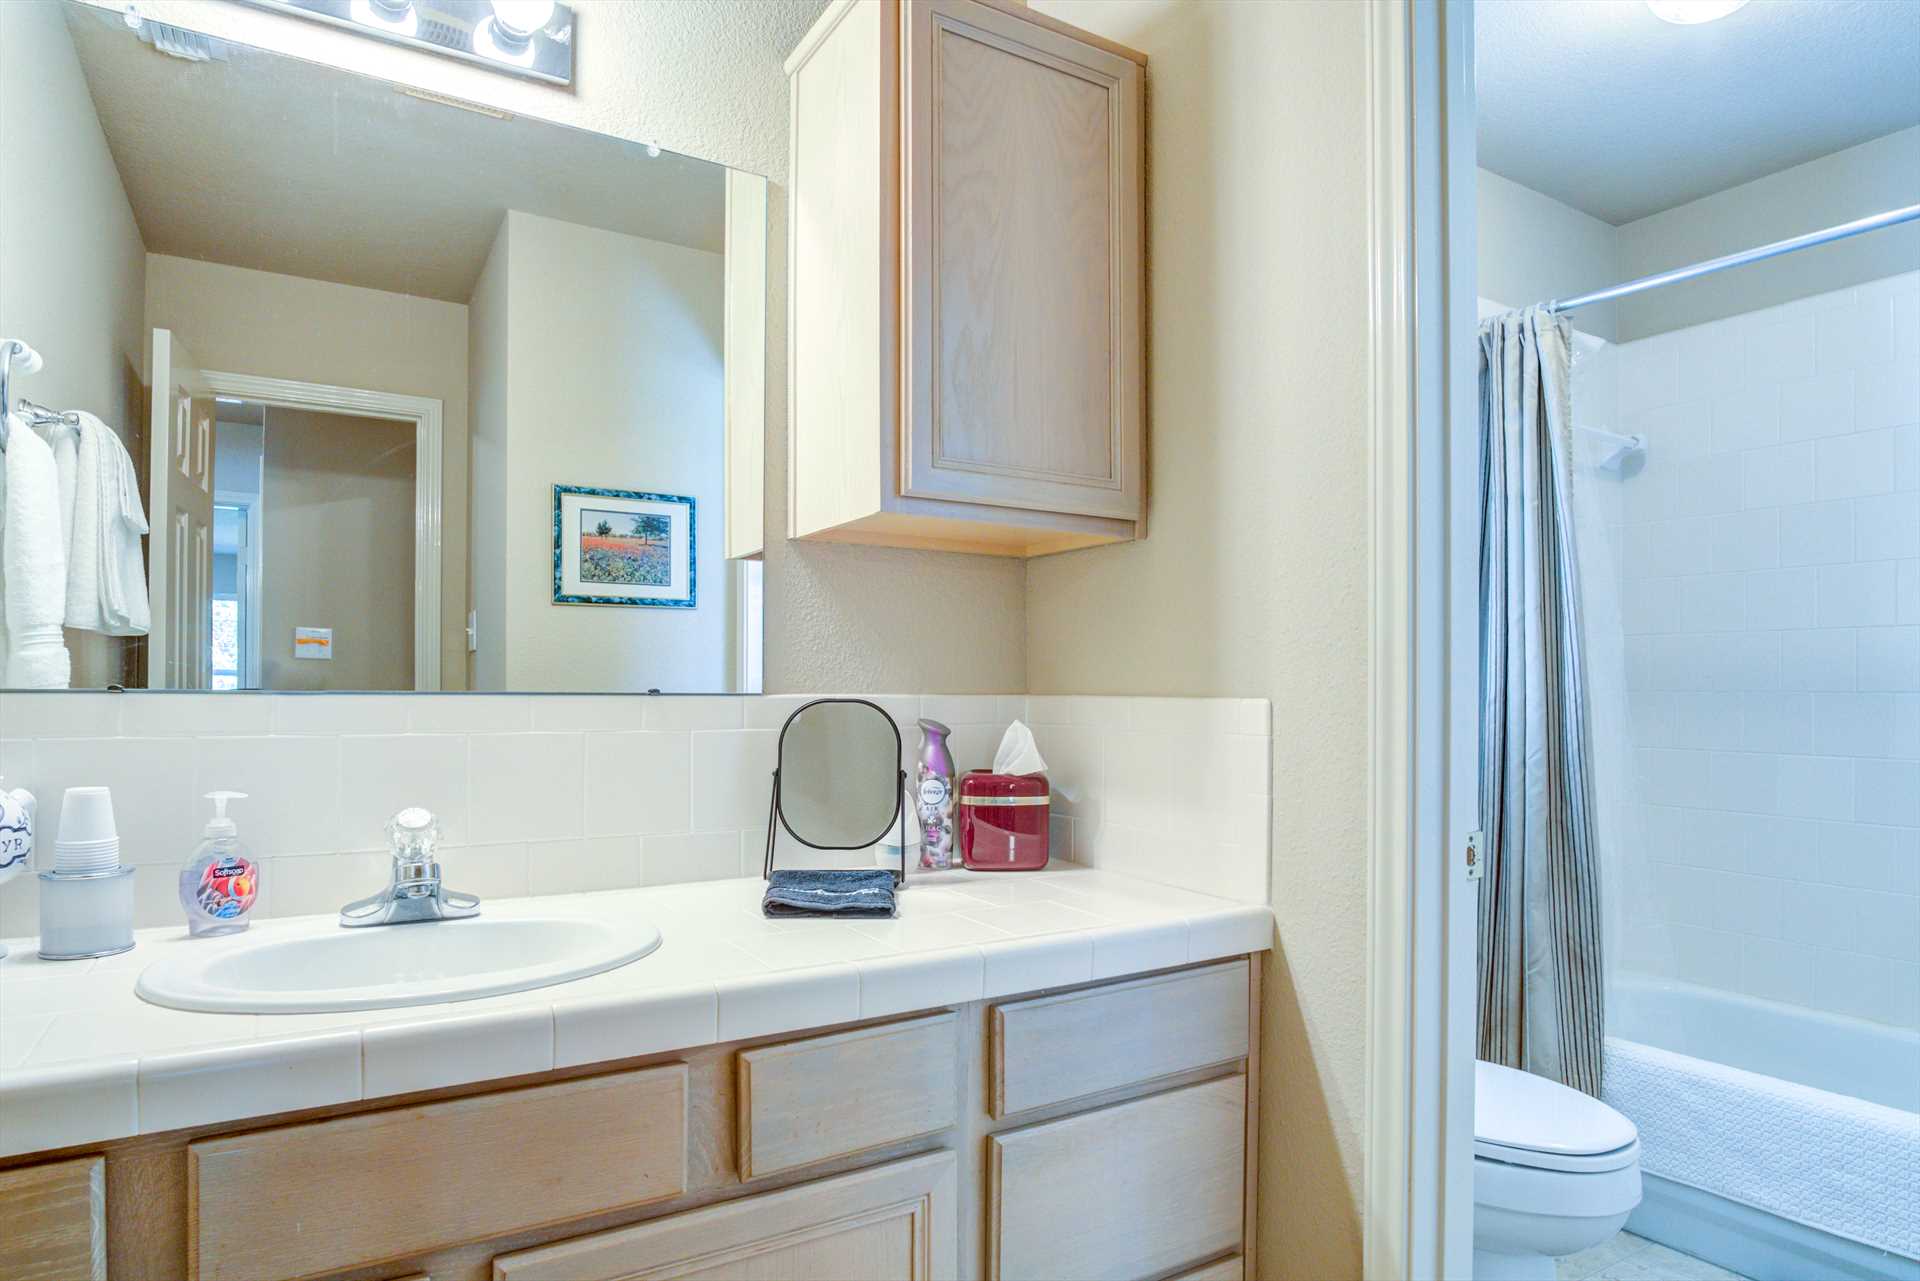                                                 The second and third bedrooms share a spotlessly-clean full bath, conveniently located in the nearby hallway.